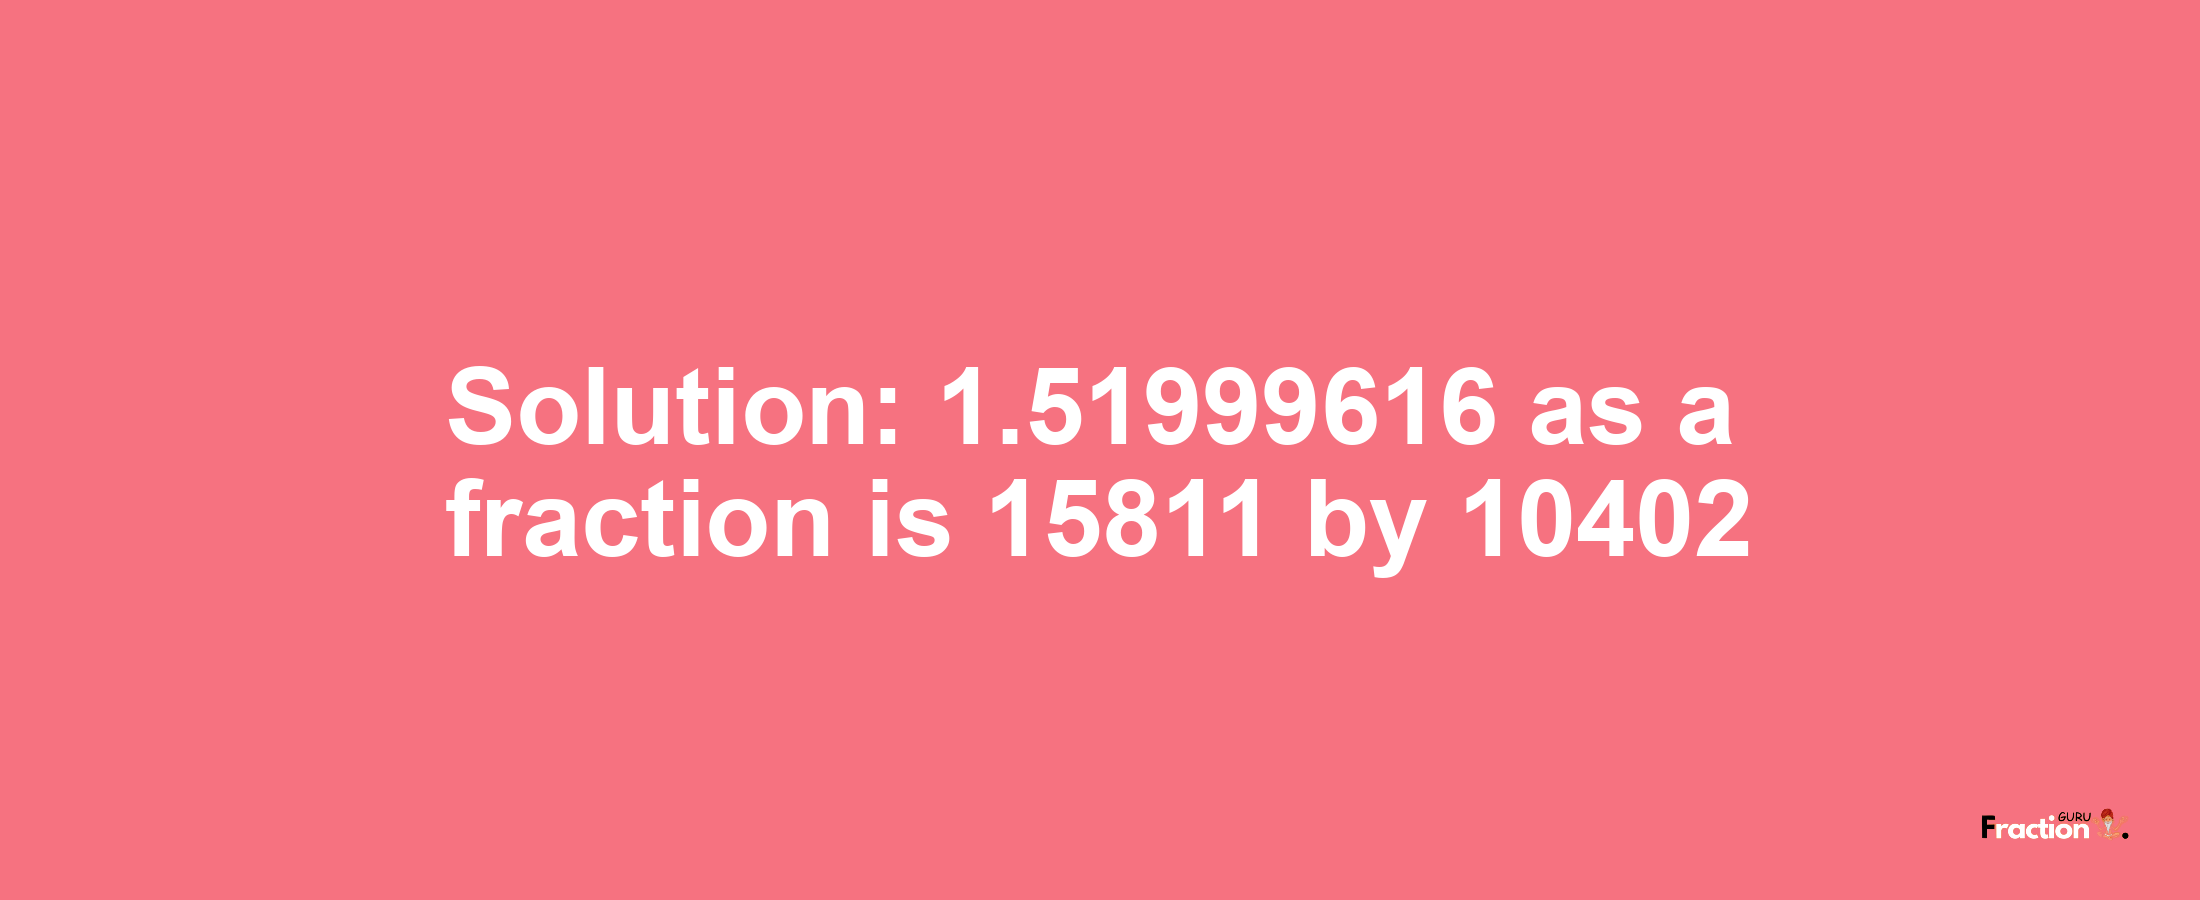 Solution:1.51999616 as a fraction is 15811/10402